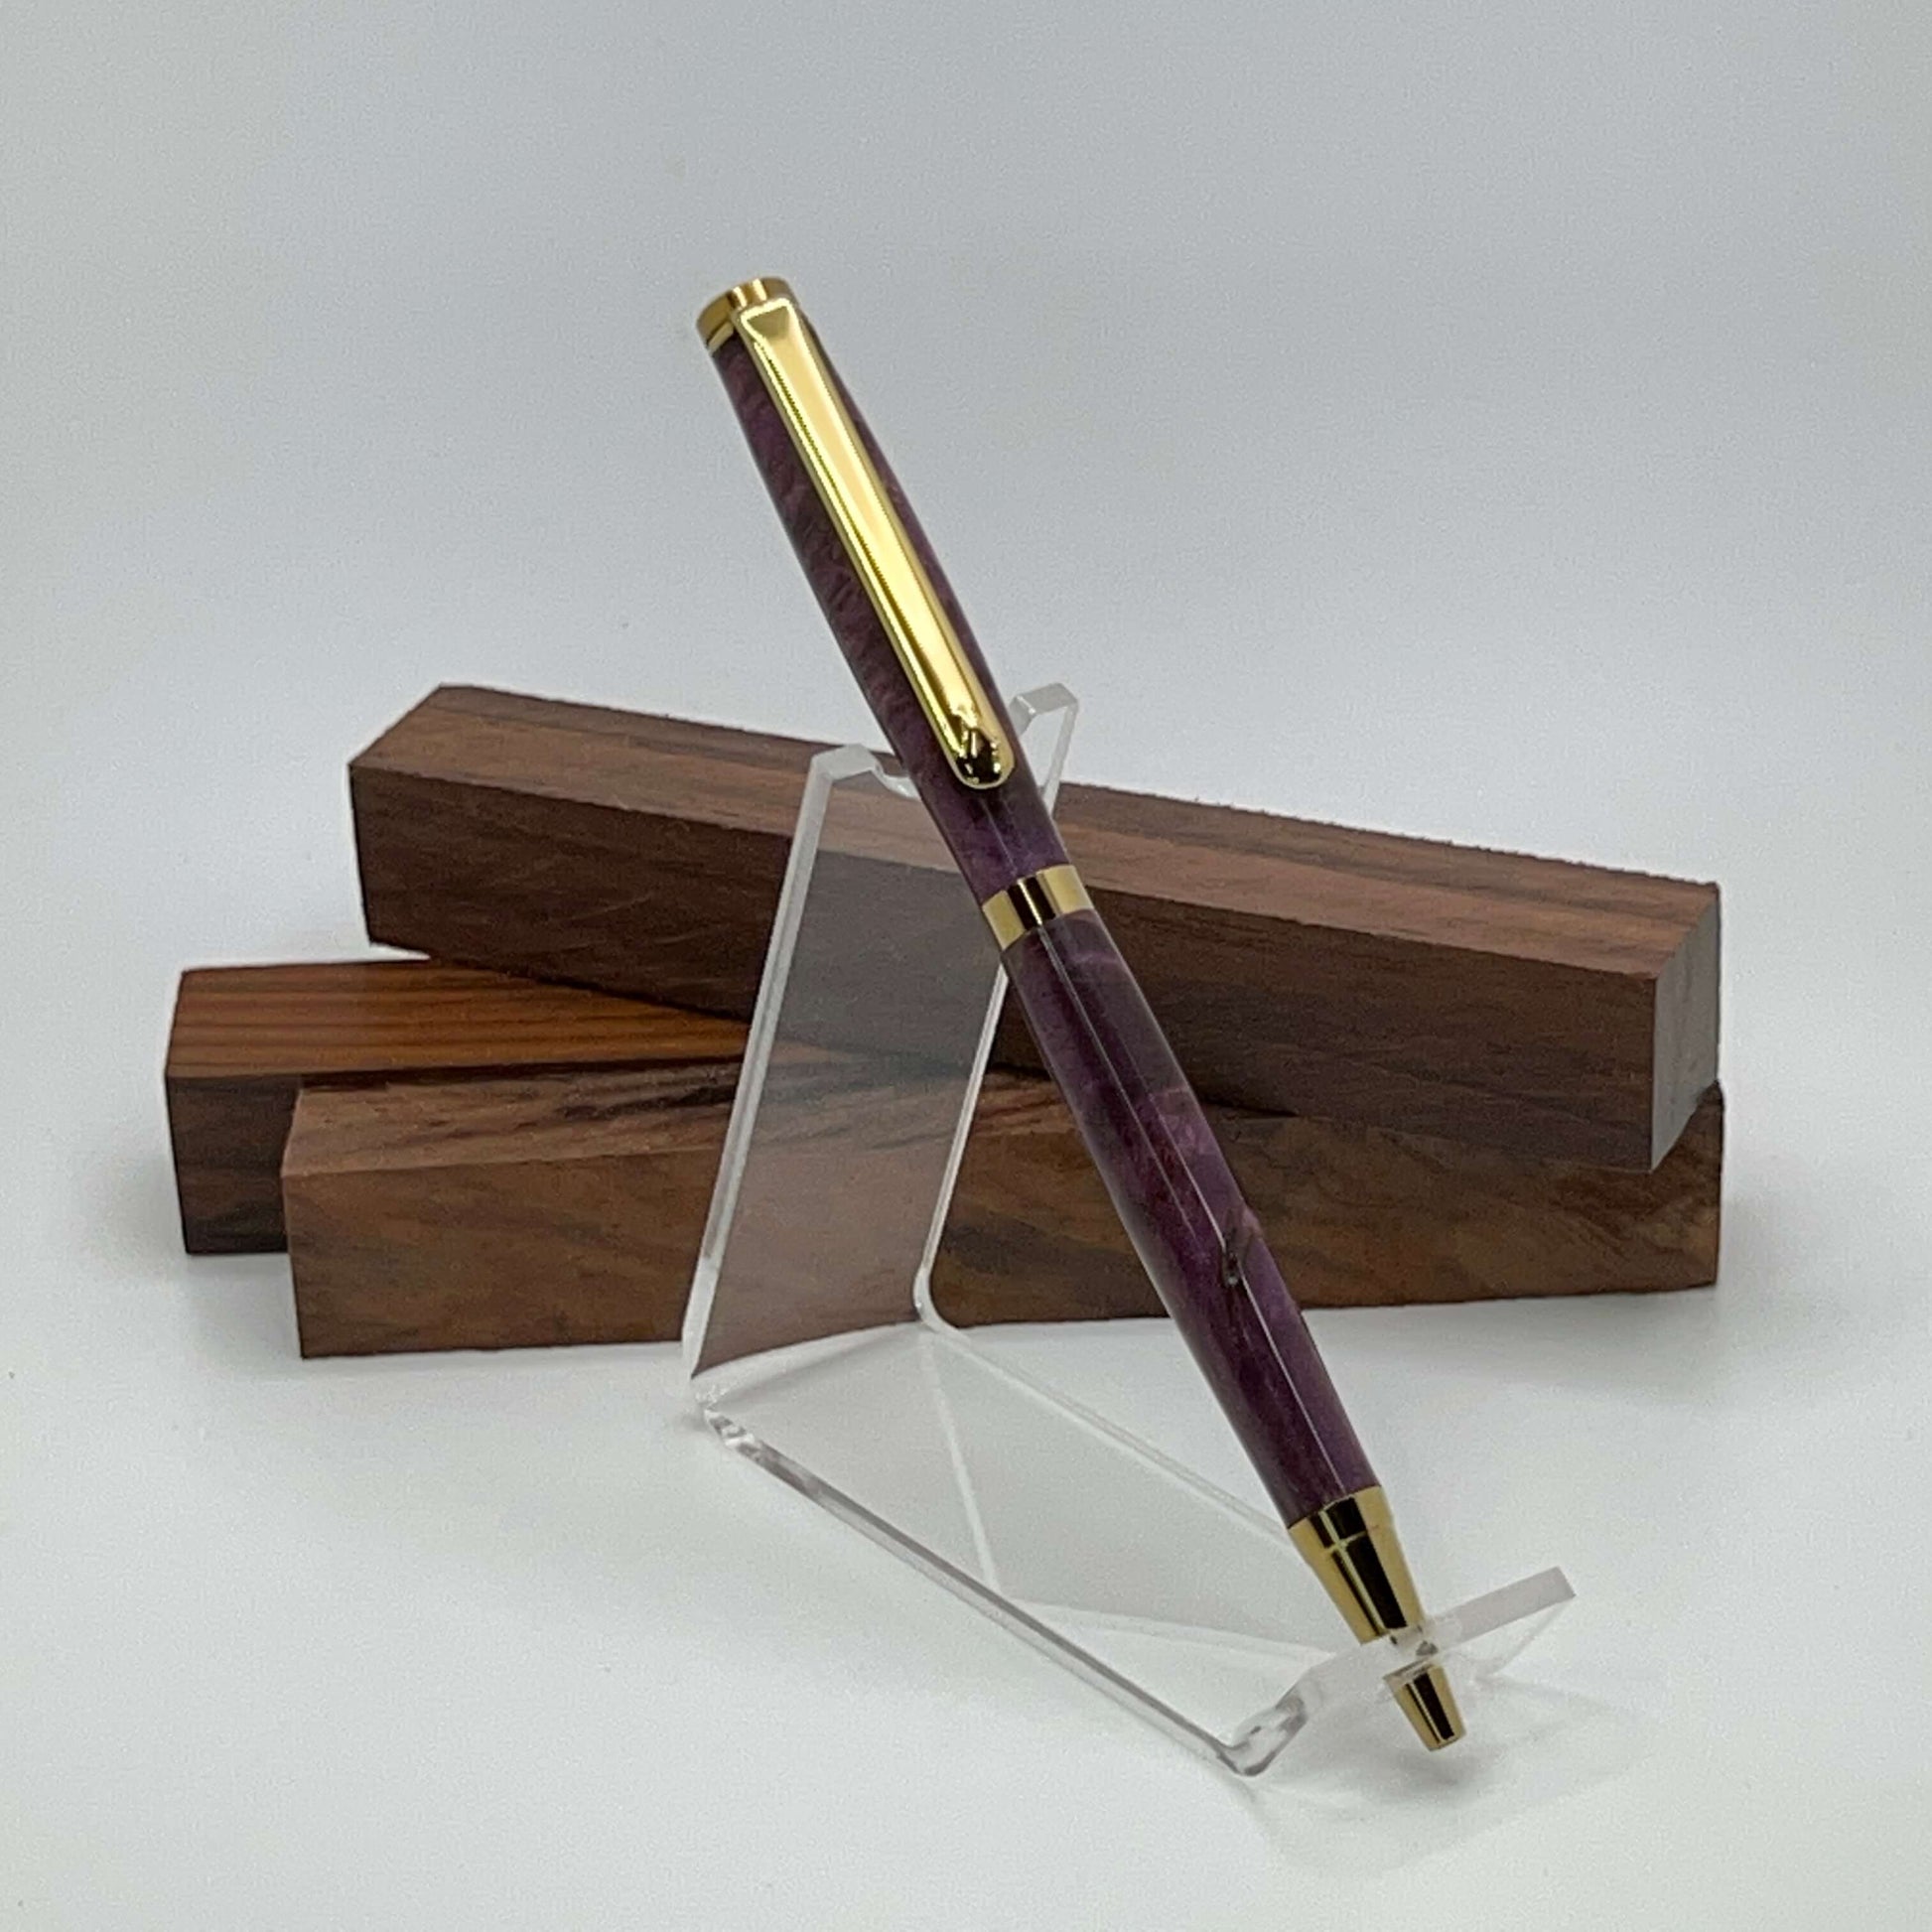 Handcrafted pen with Box Elder Burl wood dyed purple and gold titanium hardware